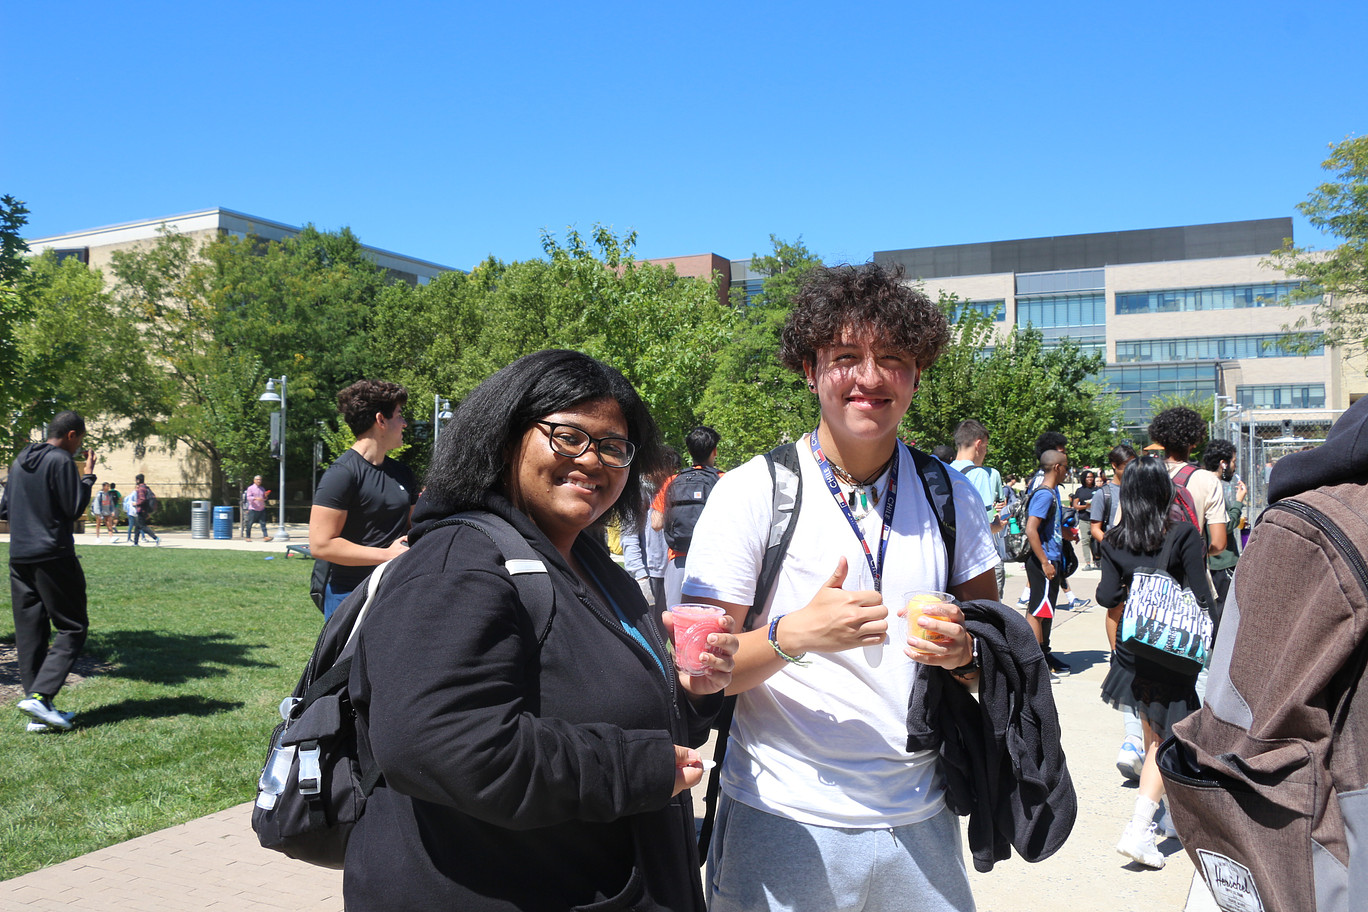 Students posed with their Italian ice.
